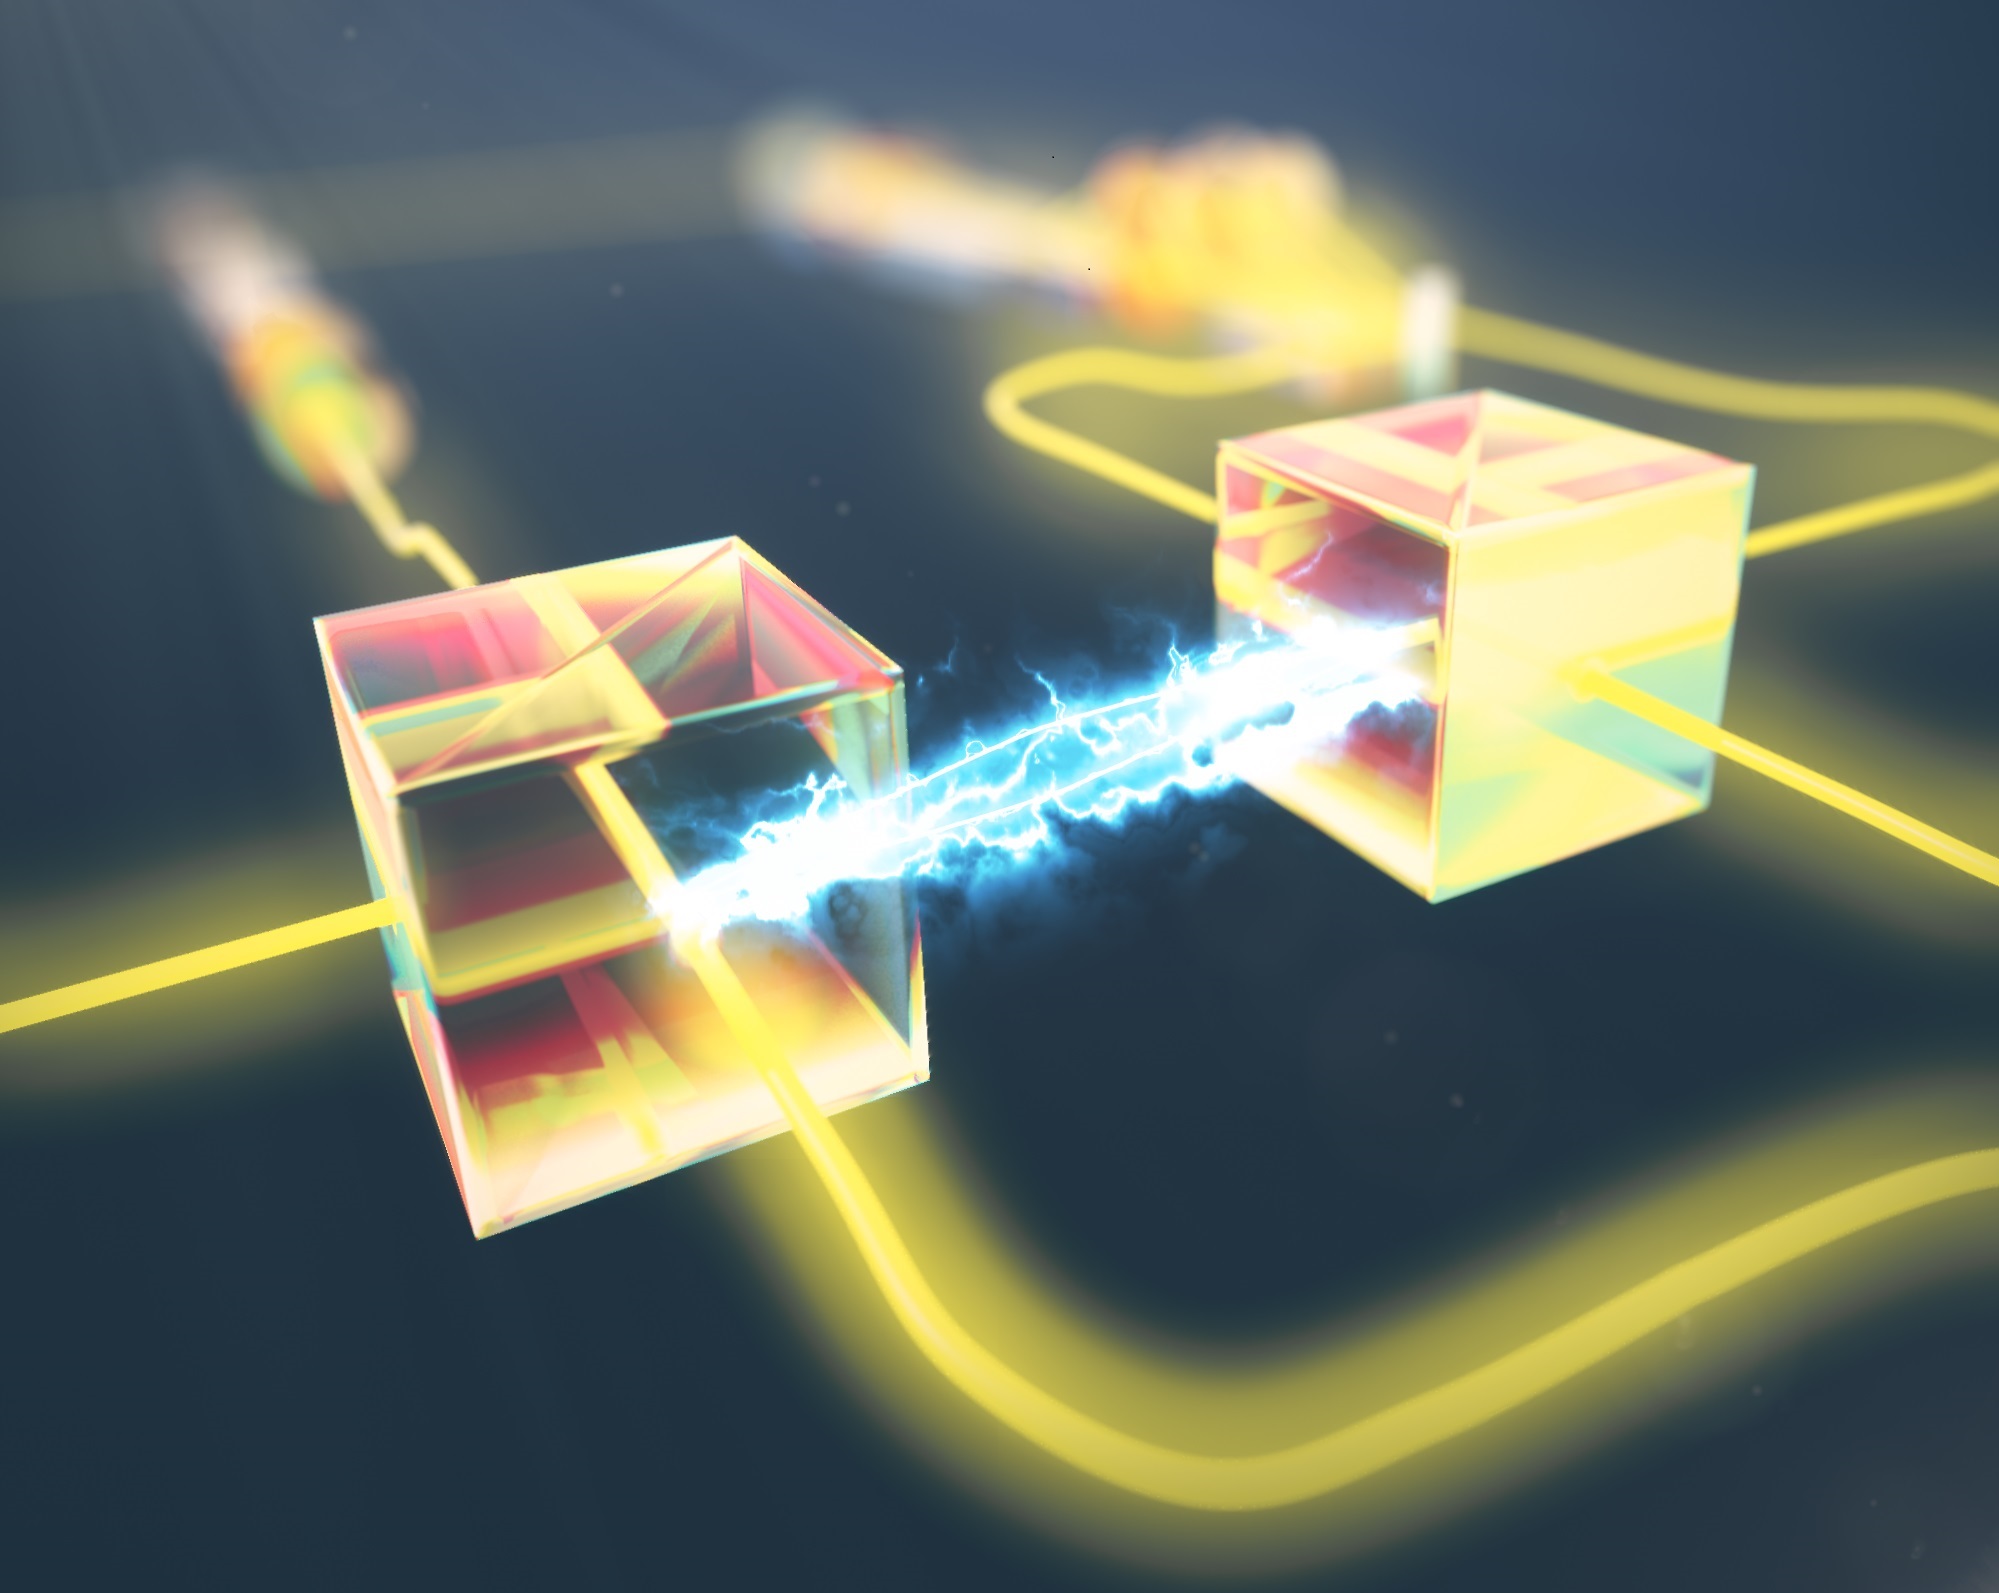 At the heart of the experiment performed by the Barz group is a two-stage interferometer in which the quantum state of an entangled photon pair is determined.